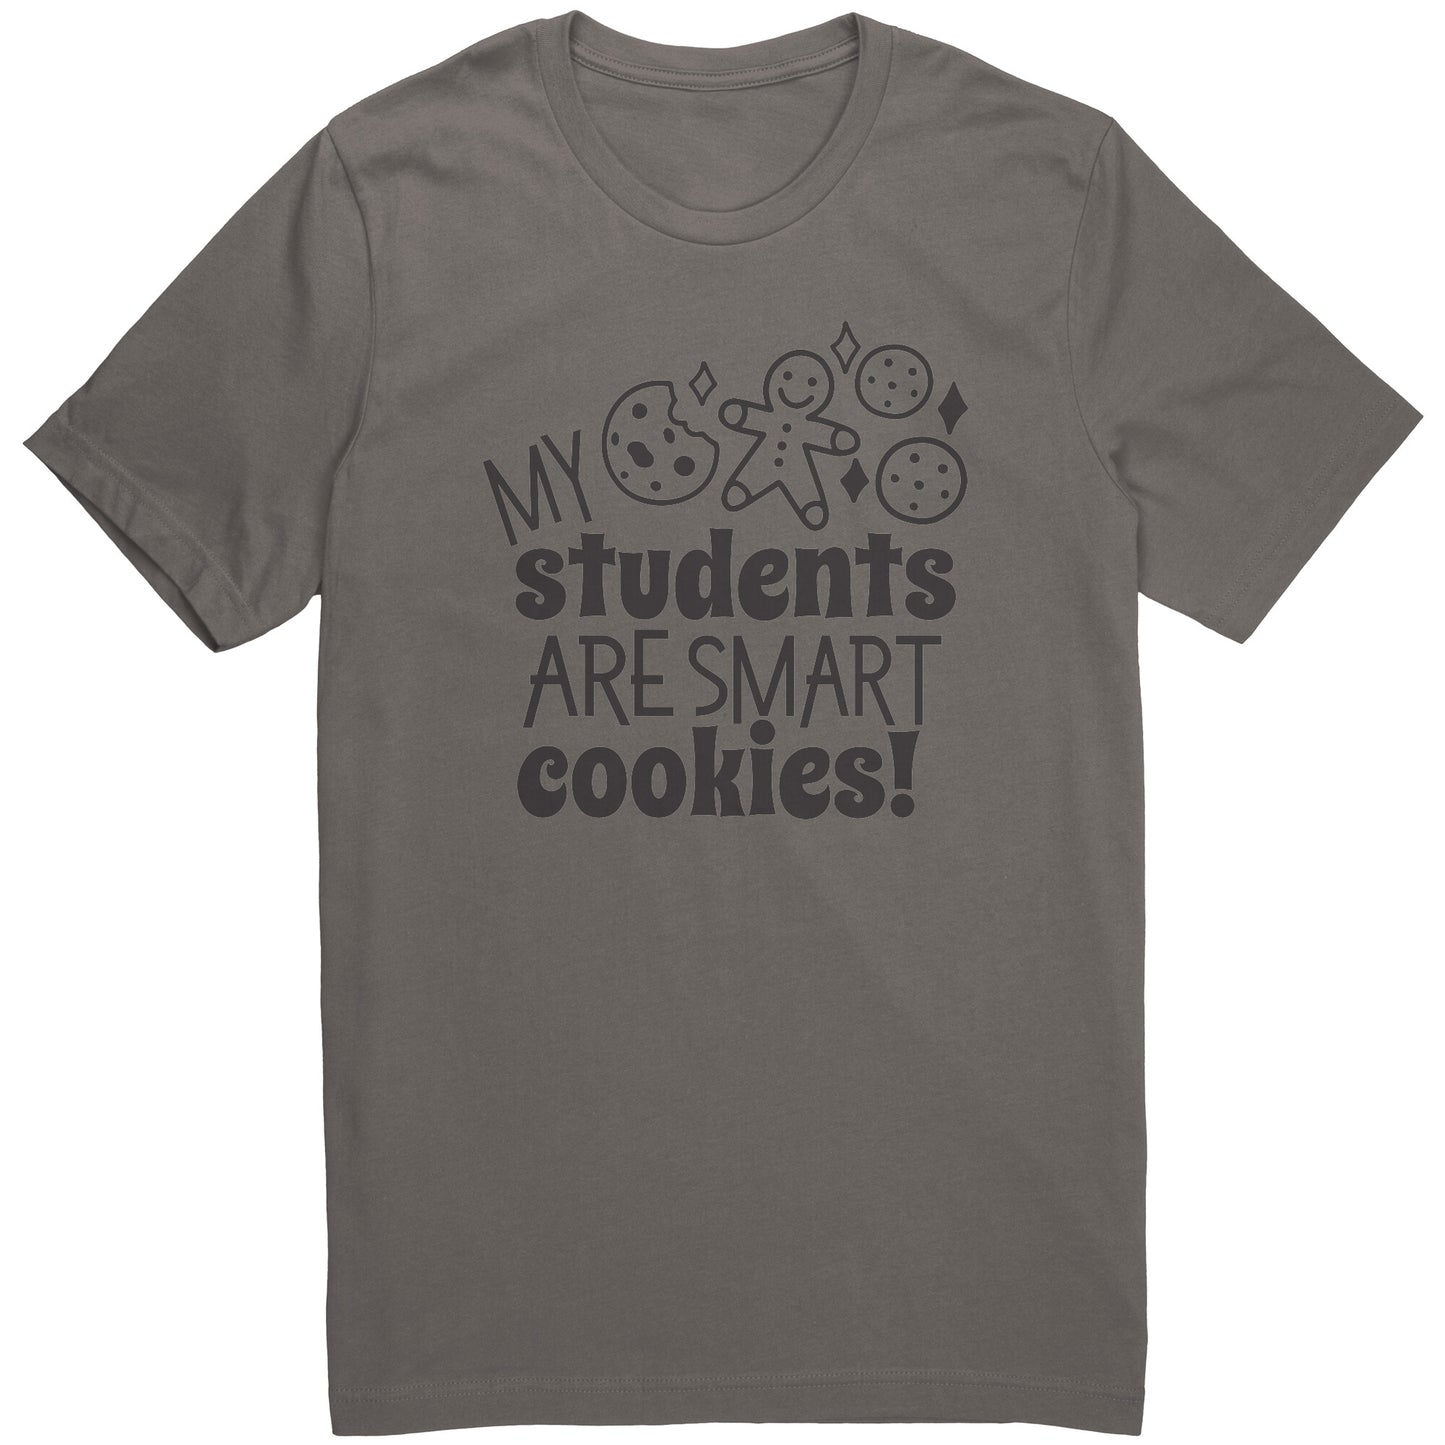 My students are smart cookies Tee